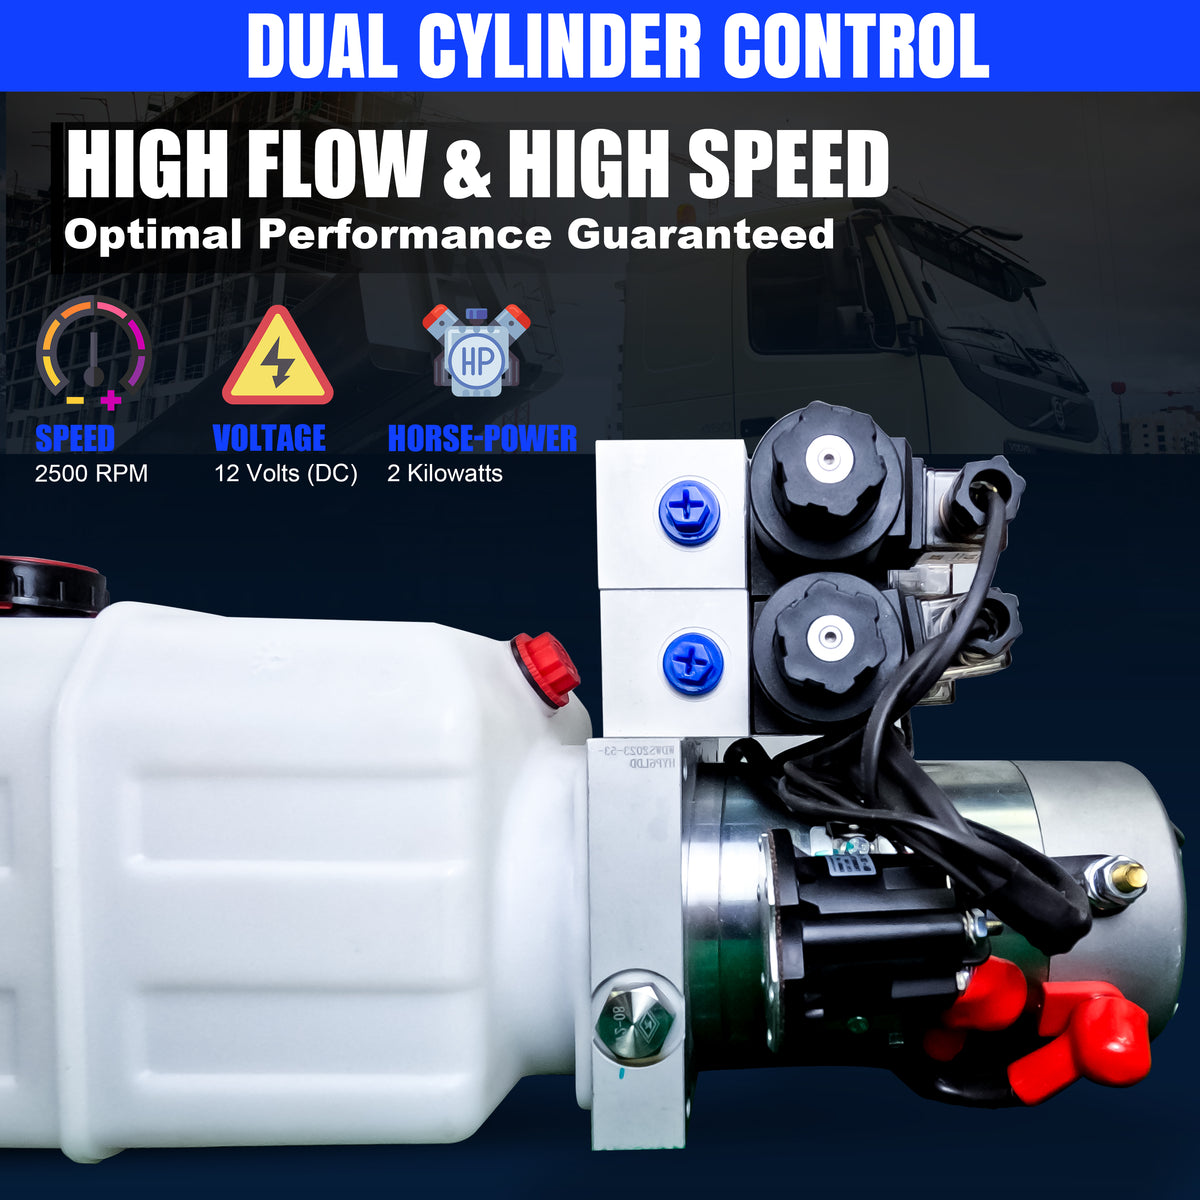 Compact and powerful Primary Mover 12V Dual Double-Acting Hydraulic Power Unit for dump trailers and trucks, enabling four hydraulic actions simultaneously.